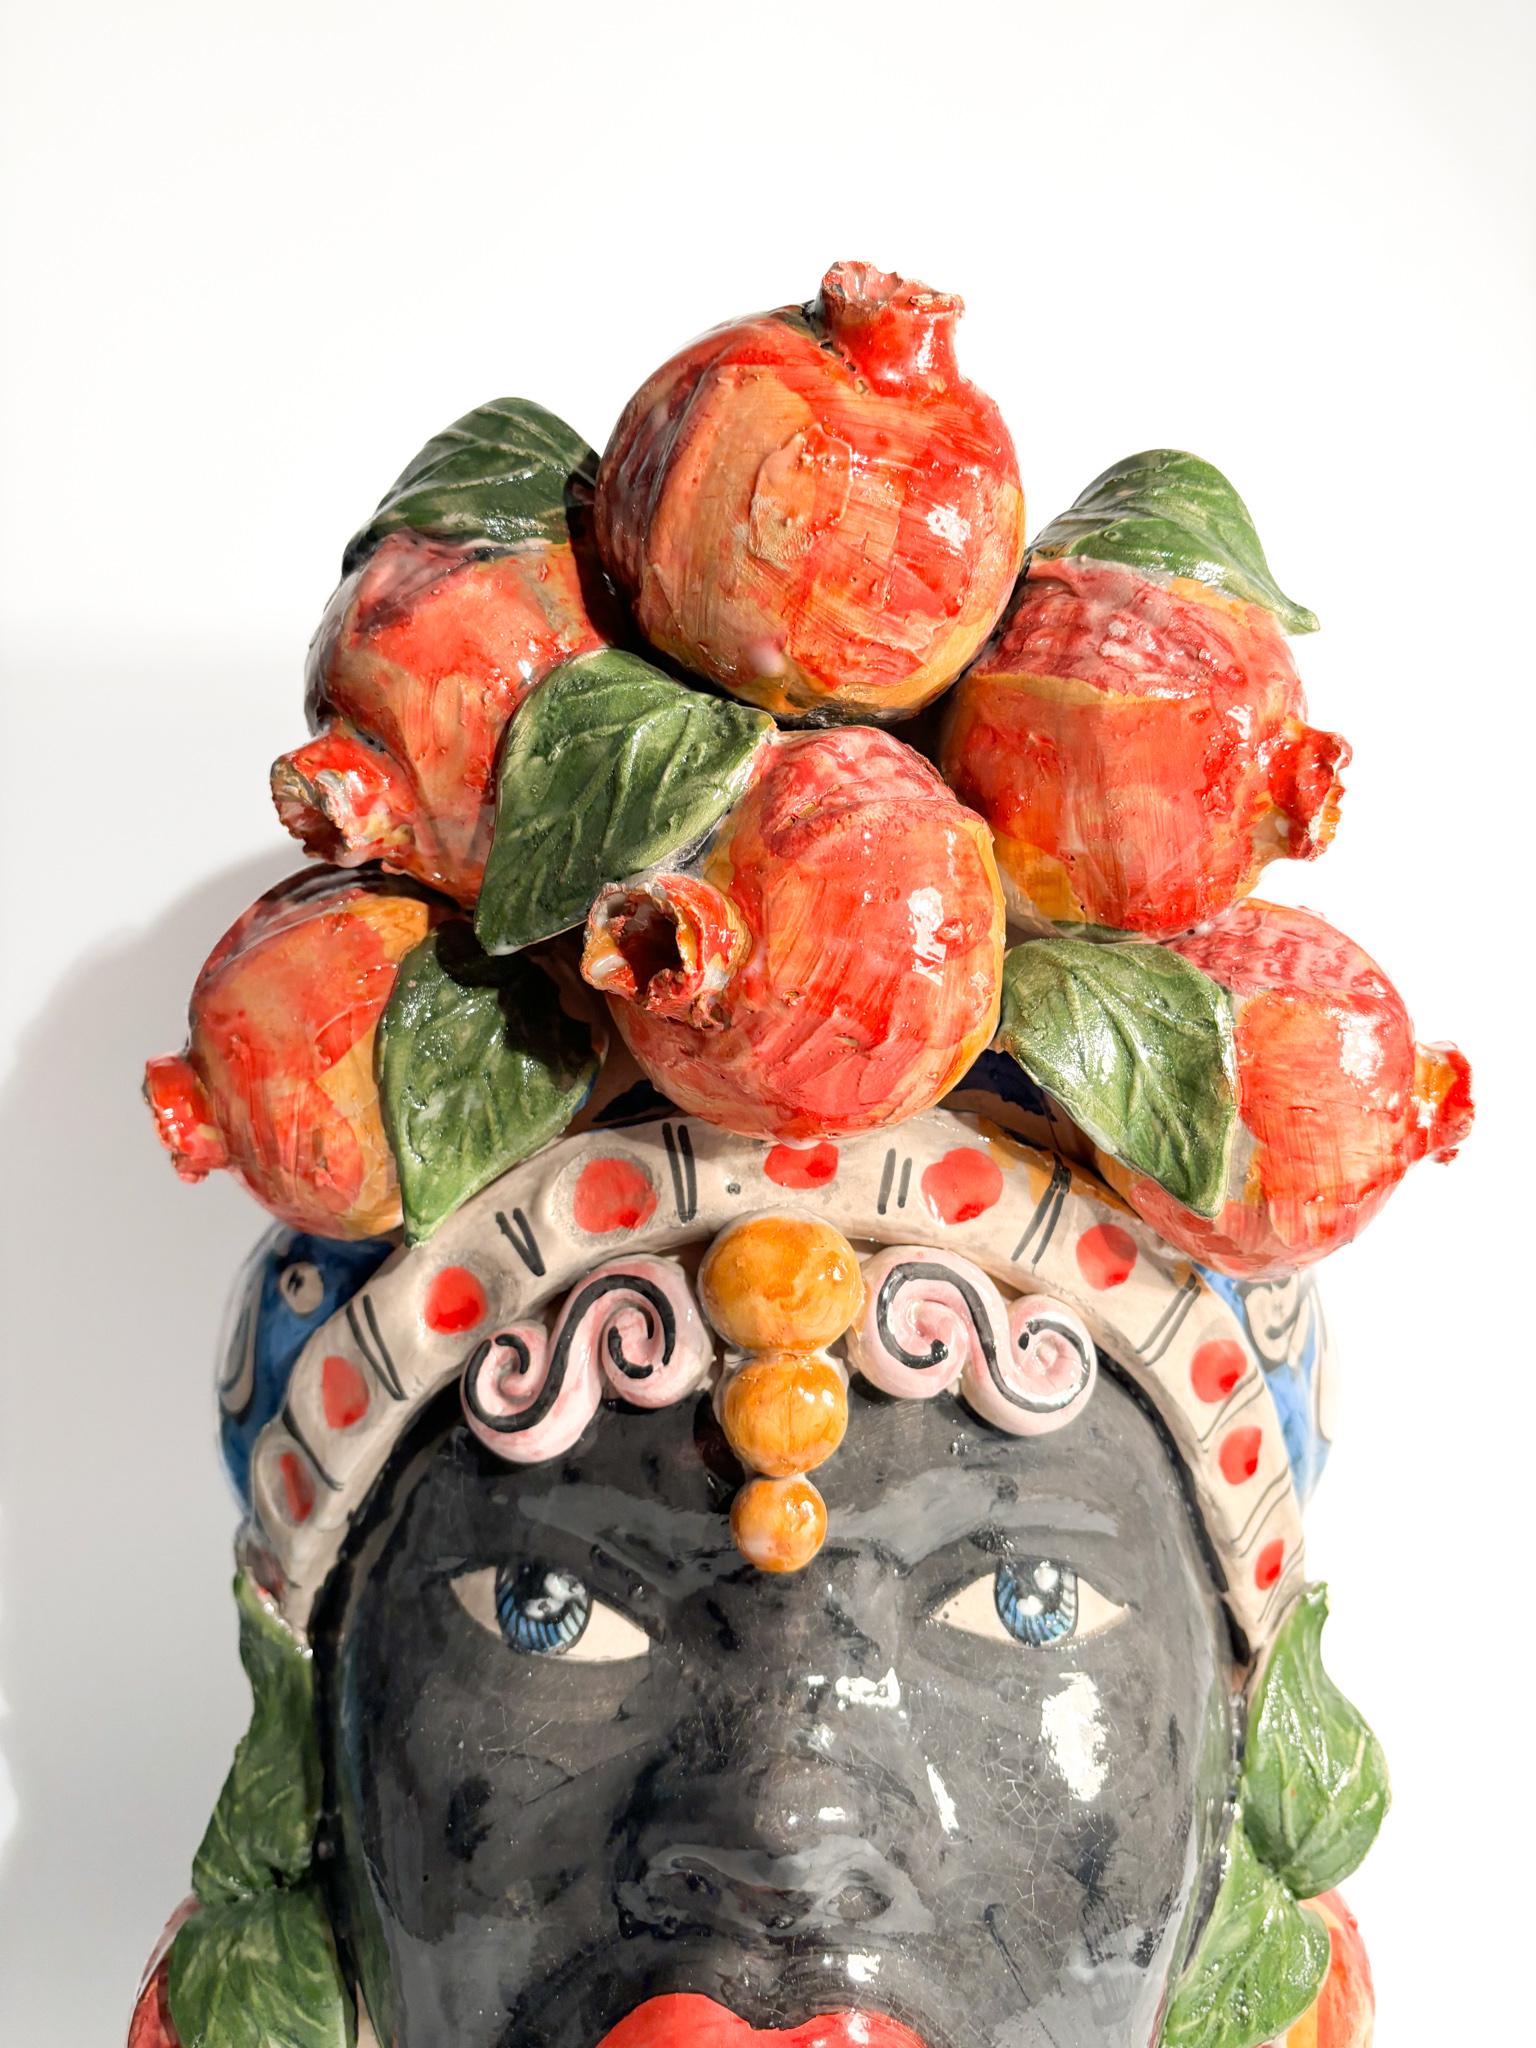 Moor's head of Caltagirone of a female figure with pomegranates, made by Ceramiche Germano in the 1990s

Ø 26 cm h 46 cm

Ceramiche Germano is a ceramic company based in Caltagirone, Sicily, Italy. The company was founded in 1967 by Sebastiano